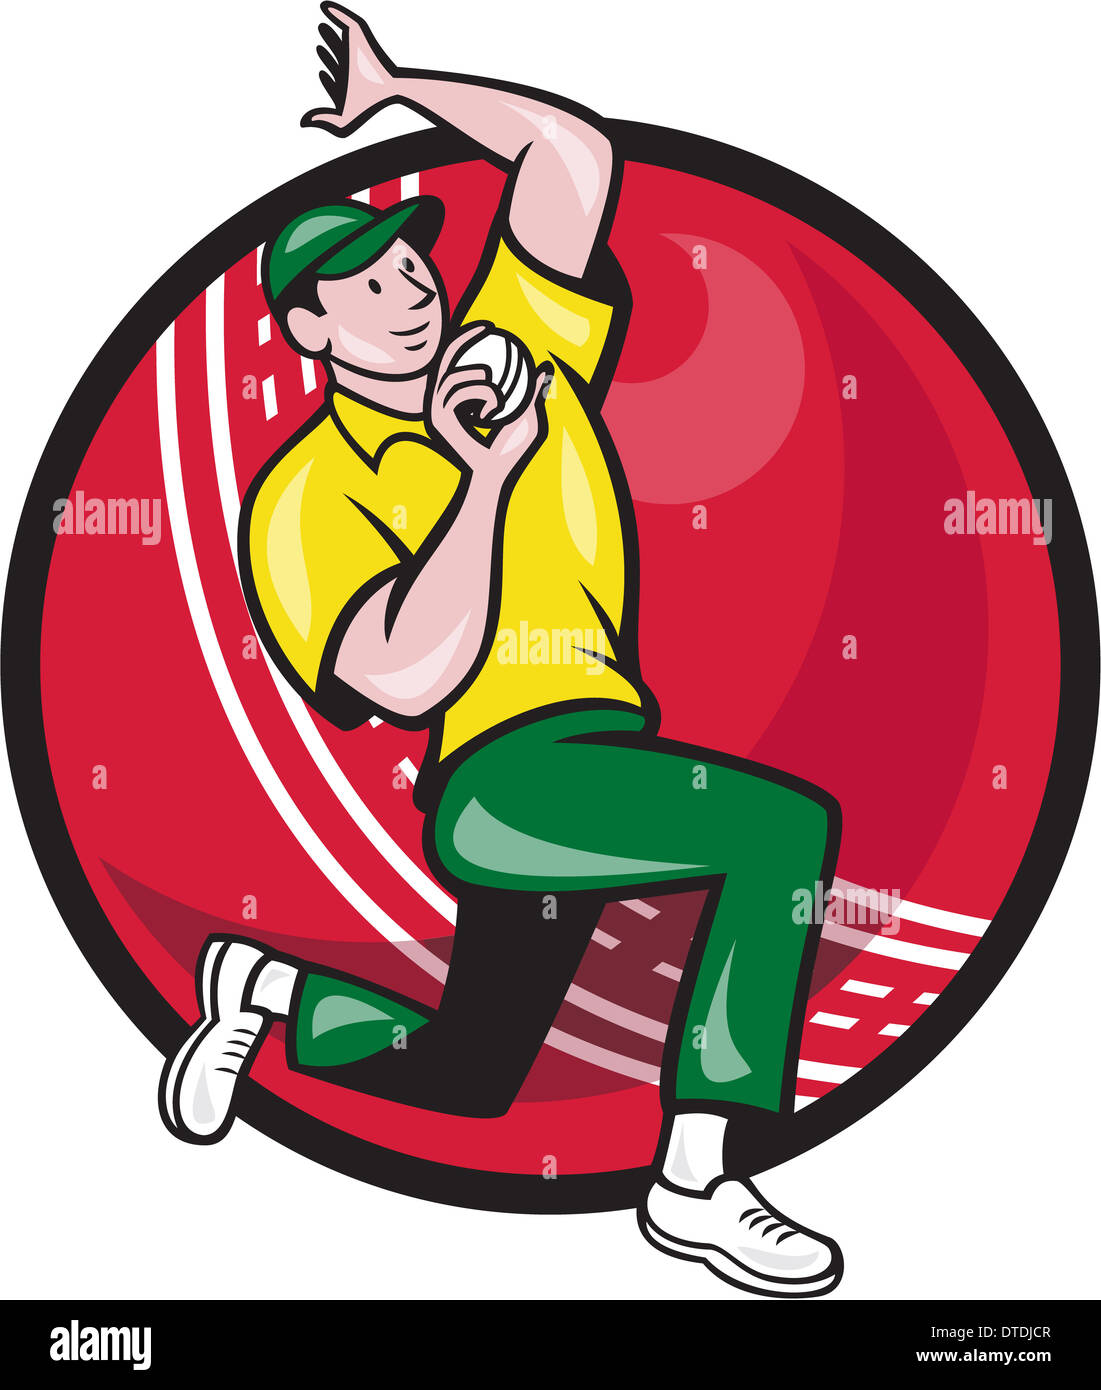 Illustration of a cricket player bowler bowling with cricket ball in background isolated on white. Stock Photo